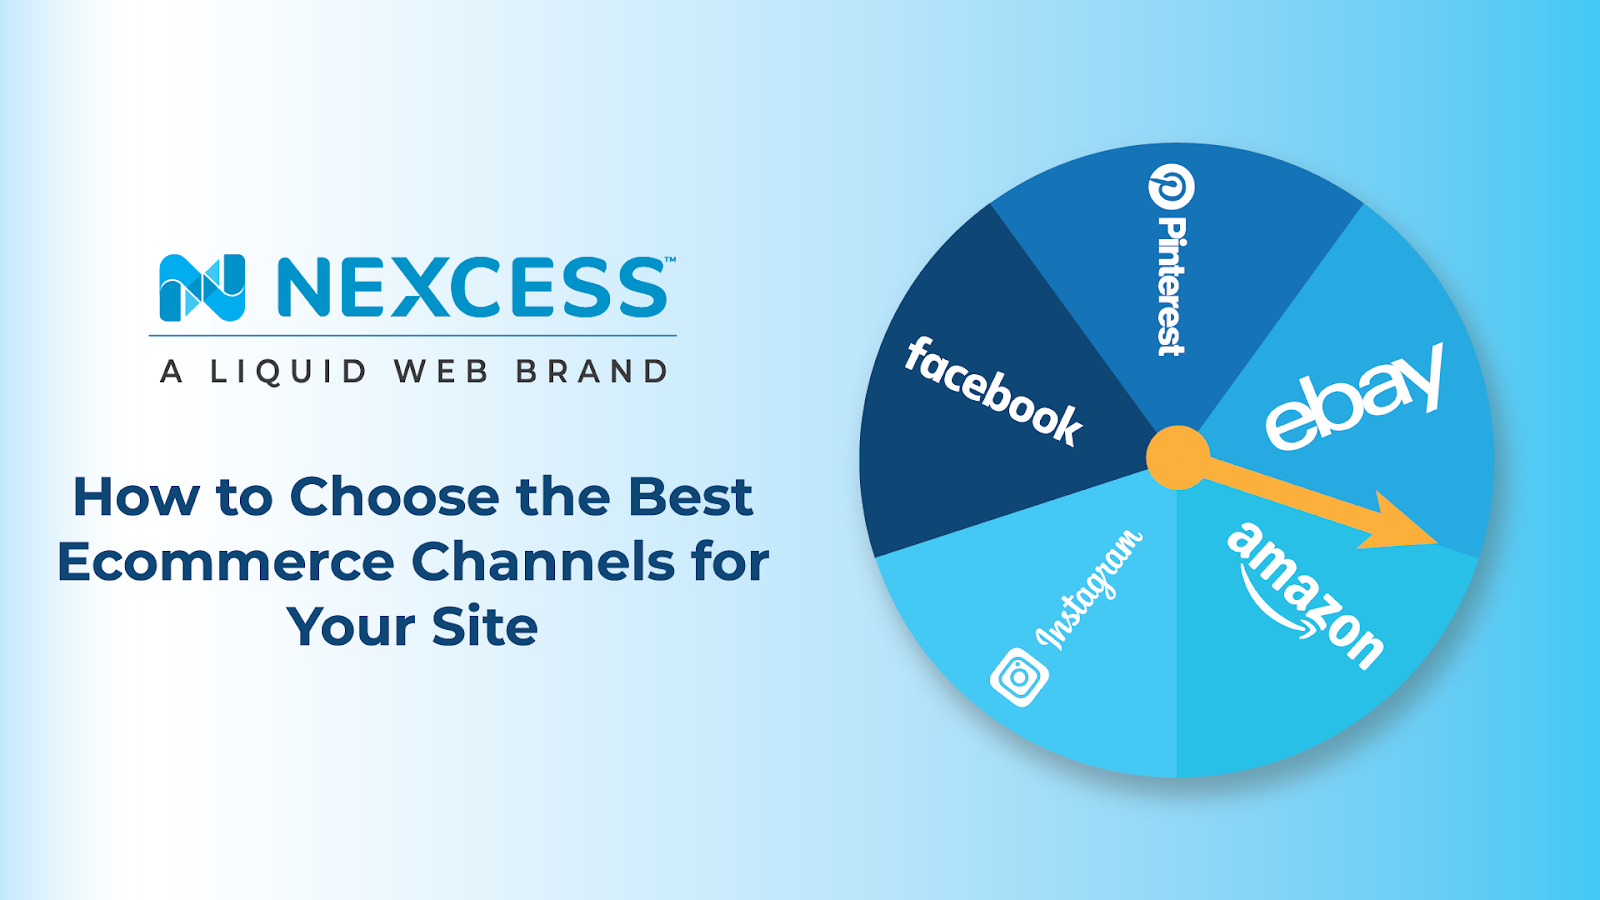  How to choose the best ecommerce channels